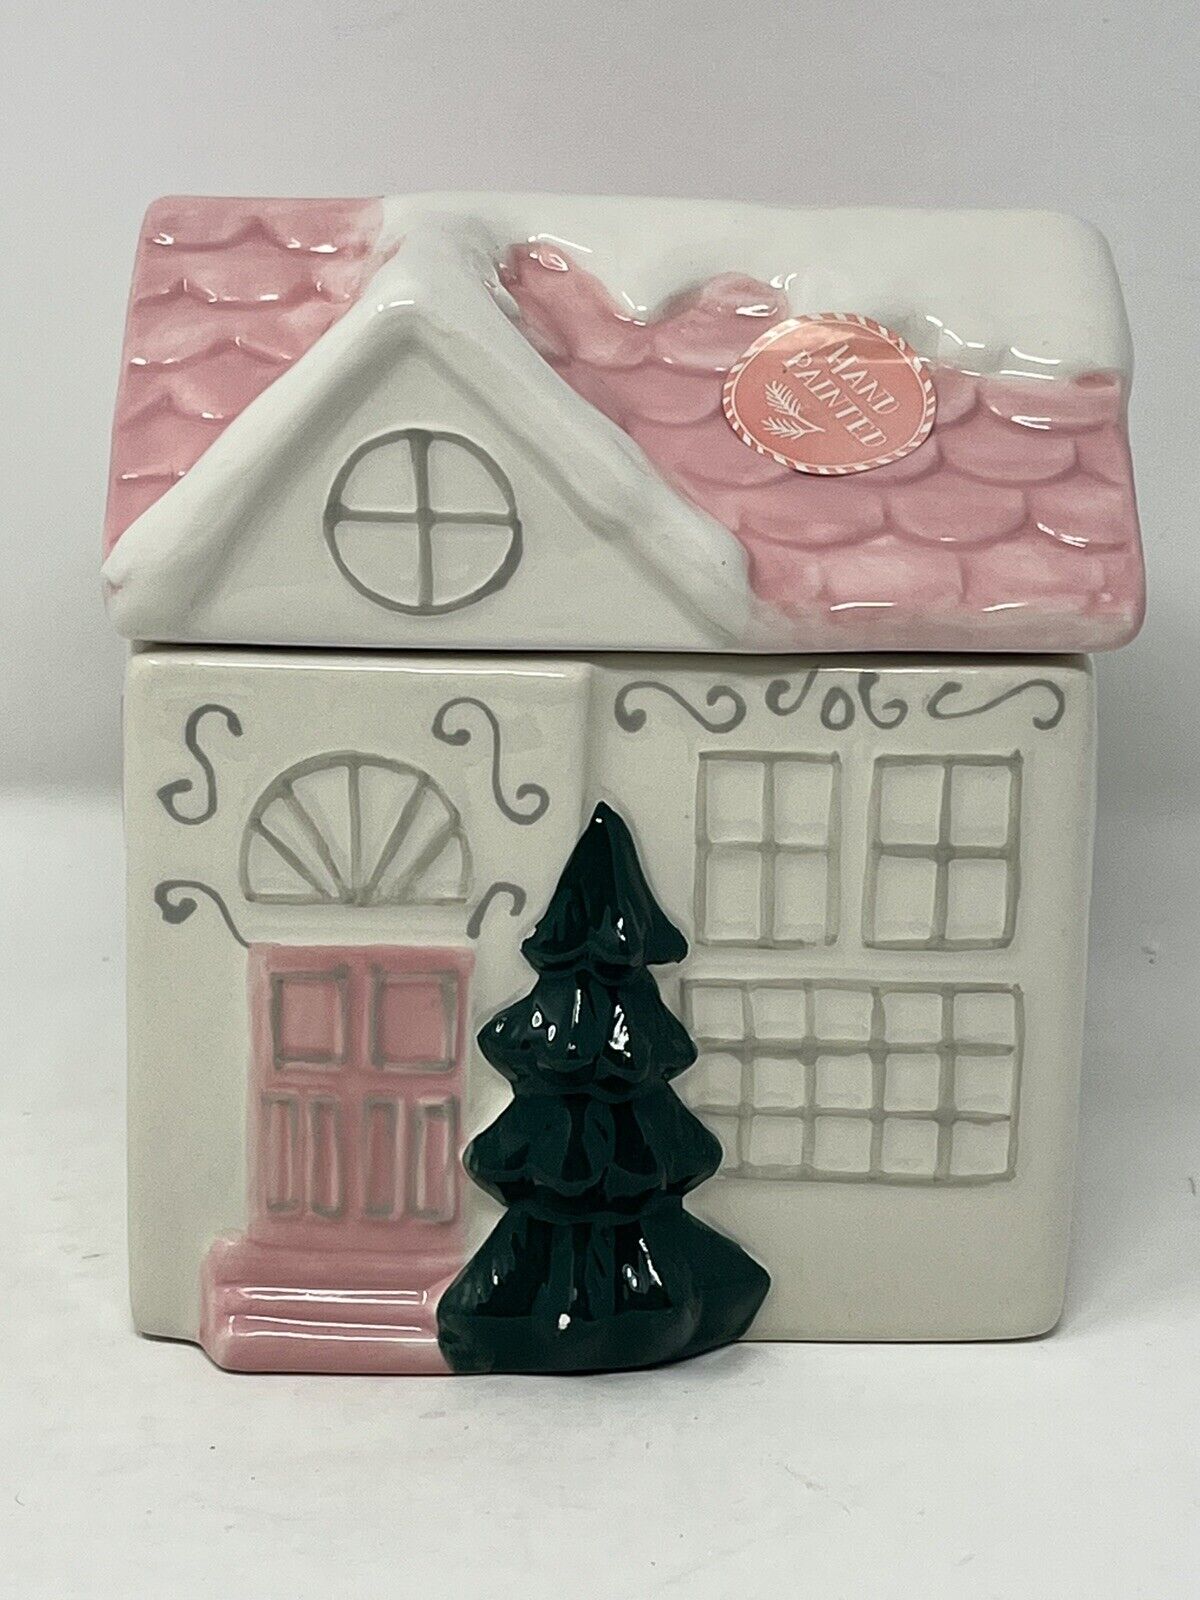 Christmas pastel Pink & White House Canister Cookie Jar Candy holiday new HTF